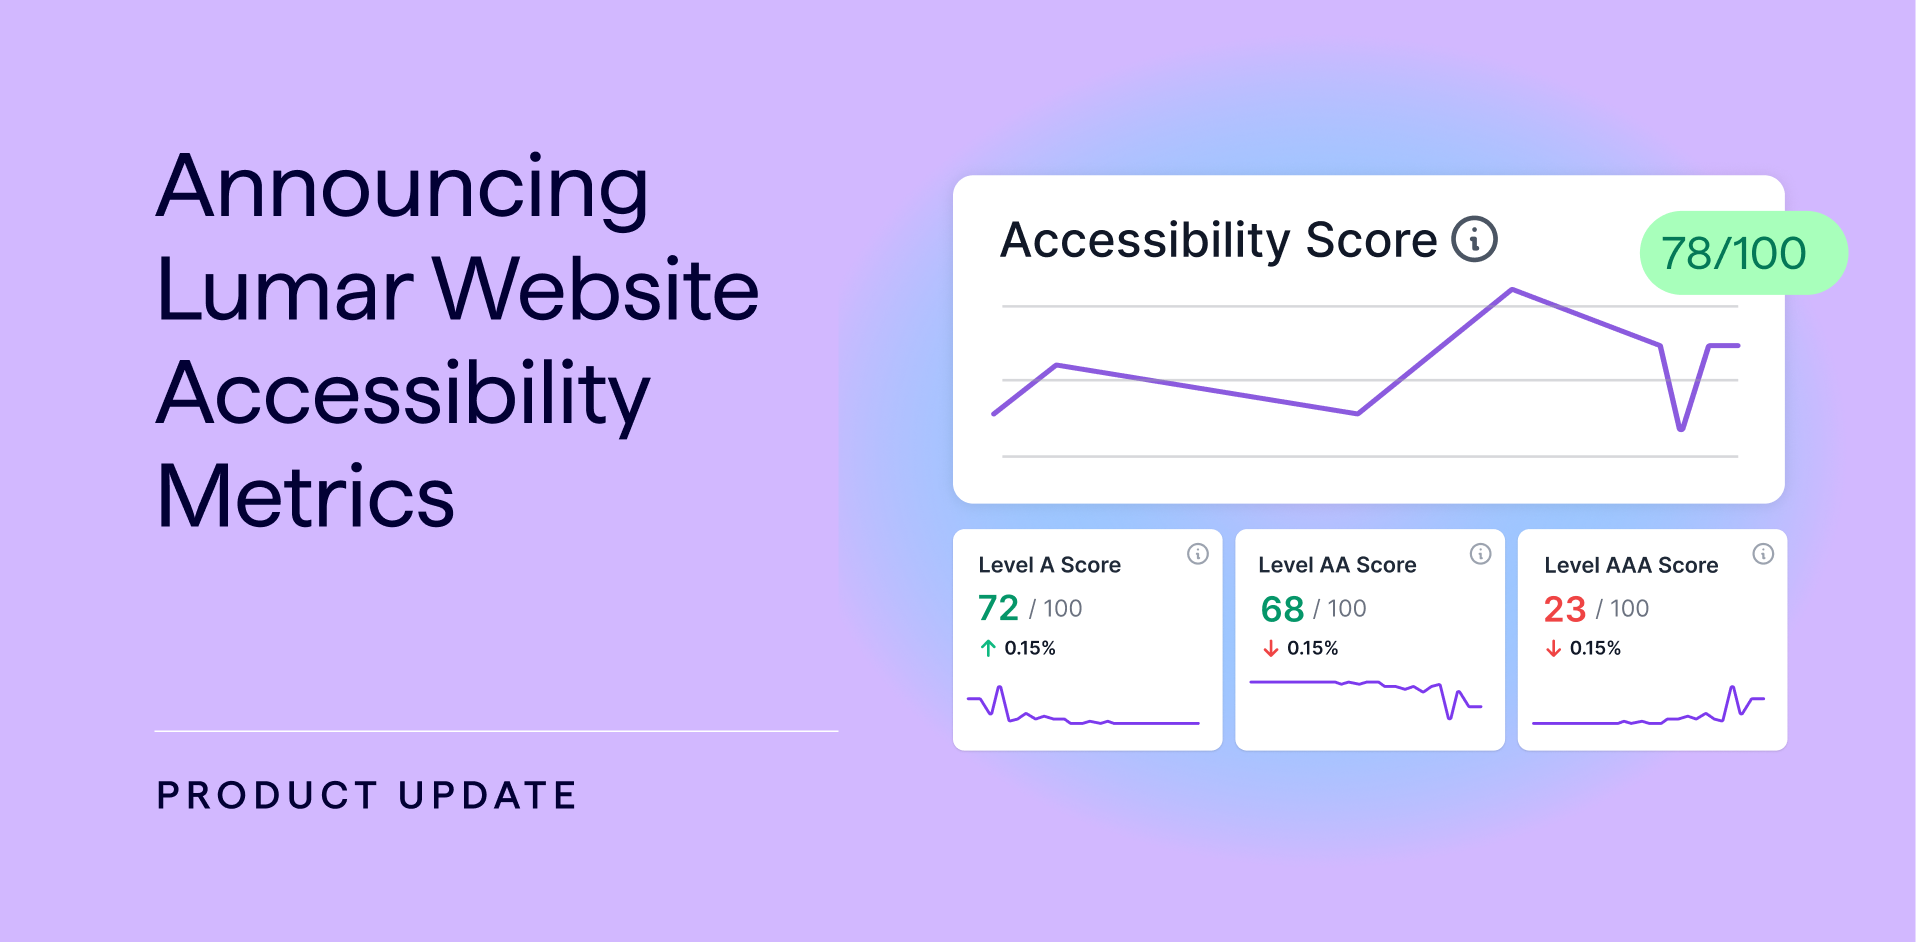 Announcing New Website Accessibility Metrics in Lumar